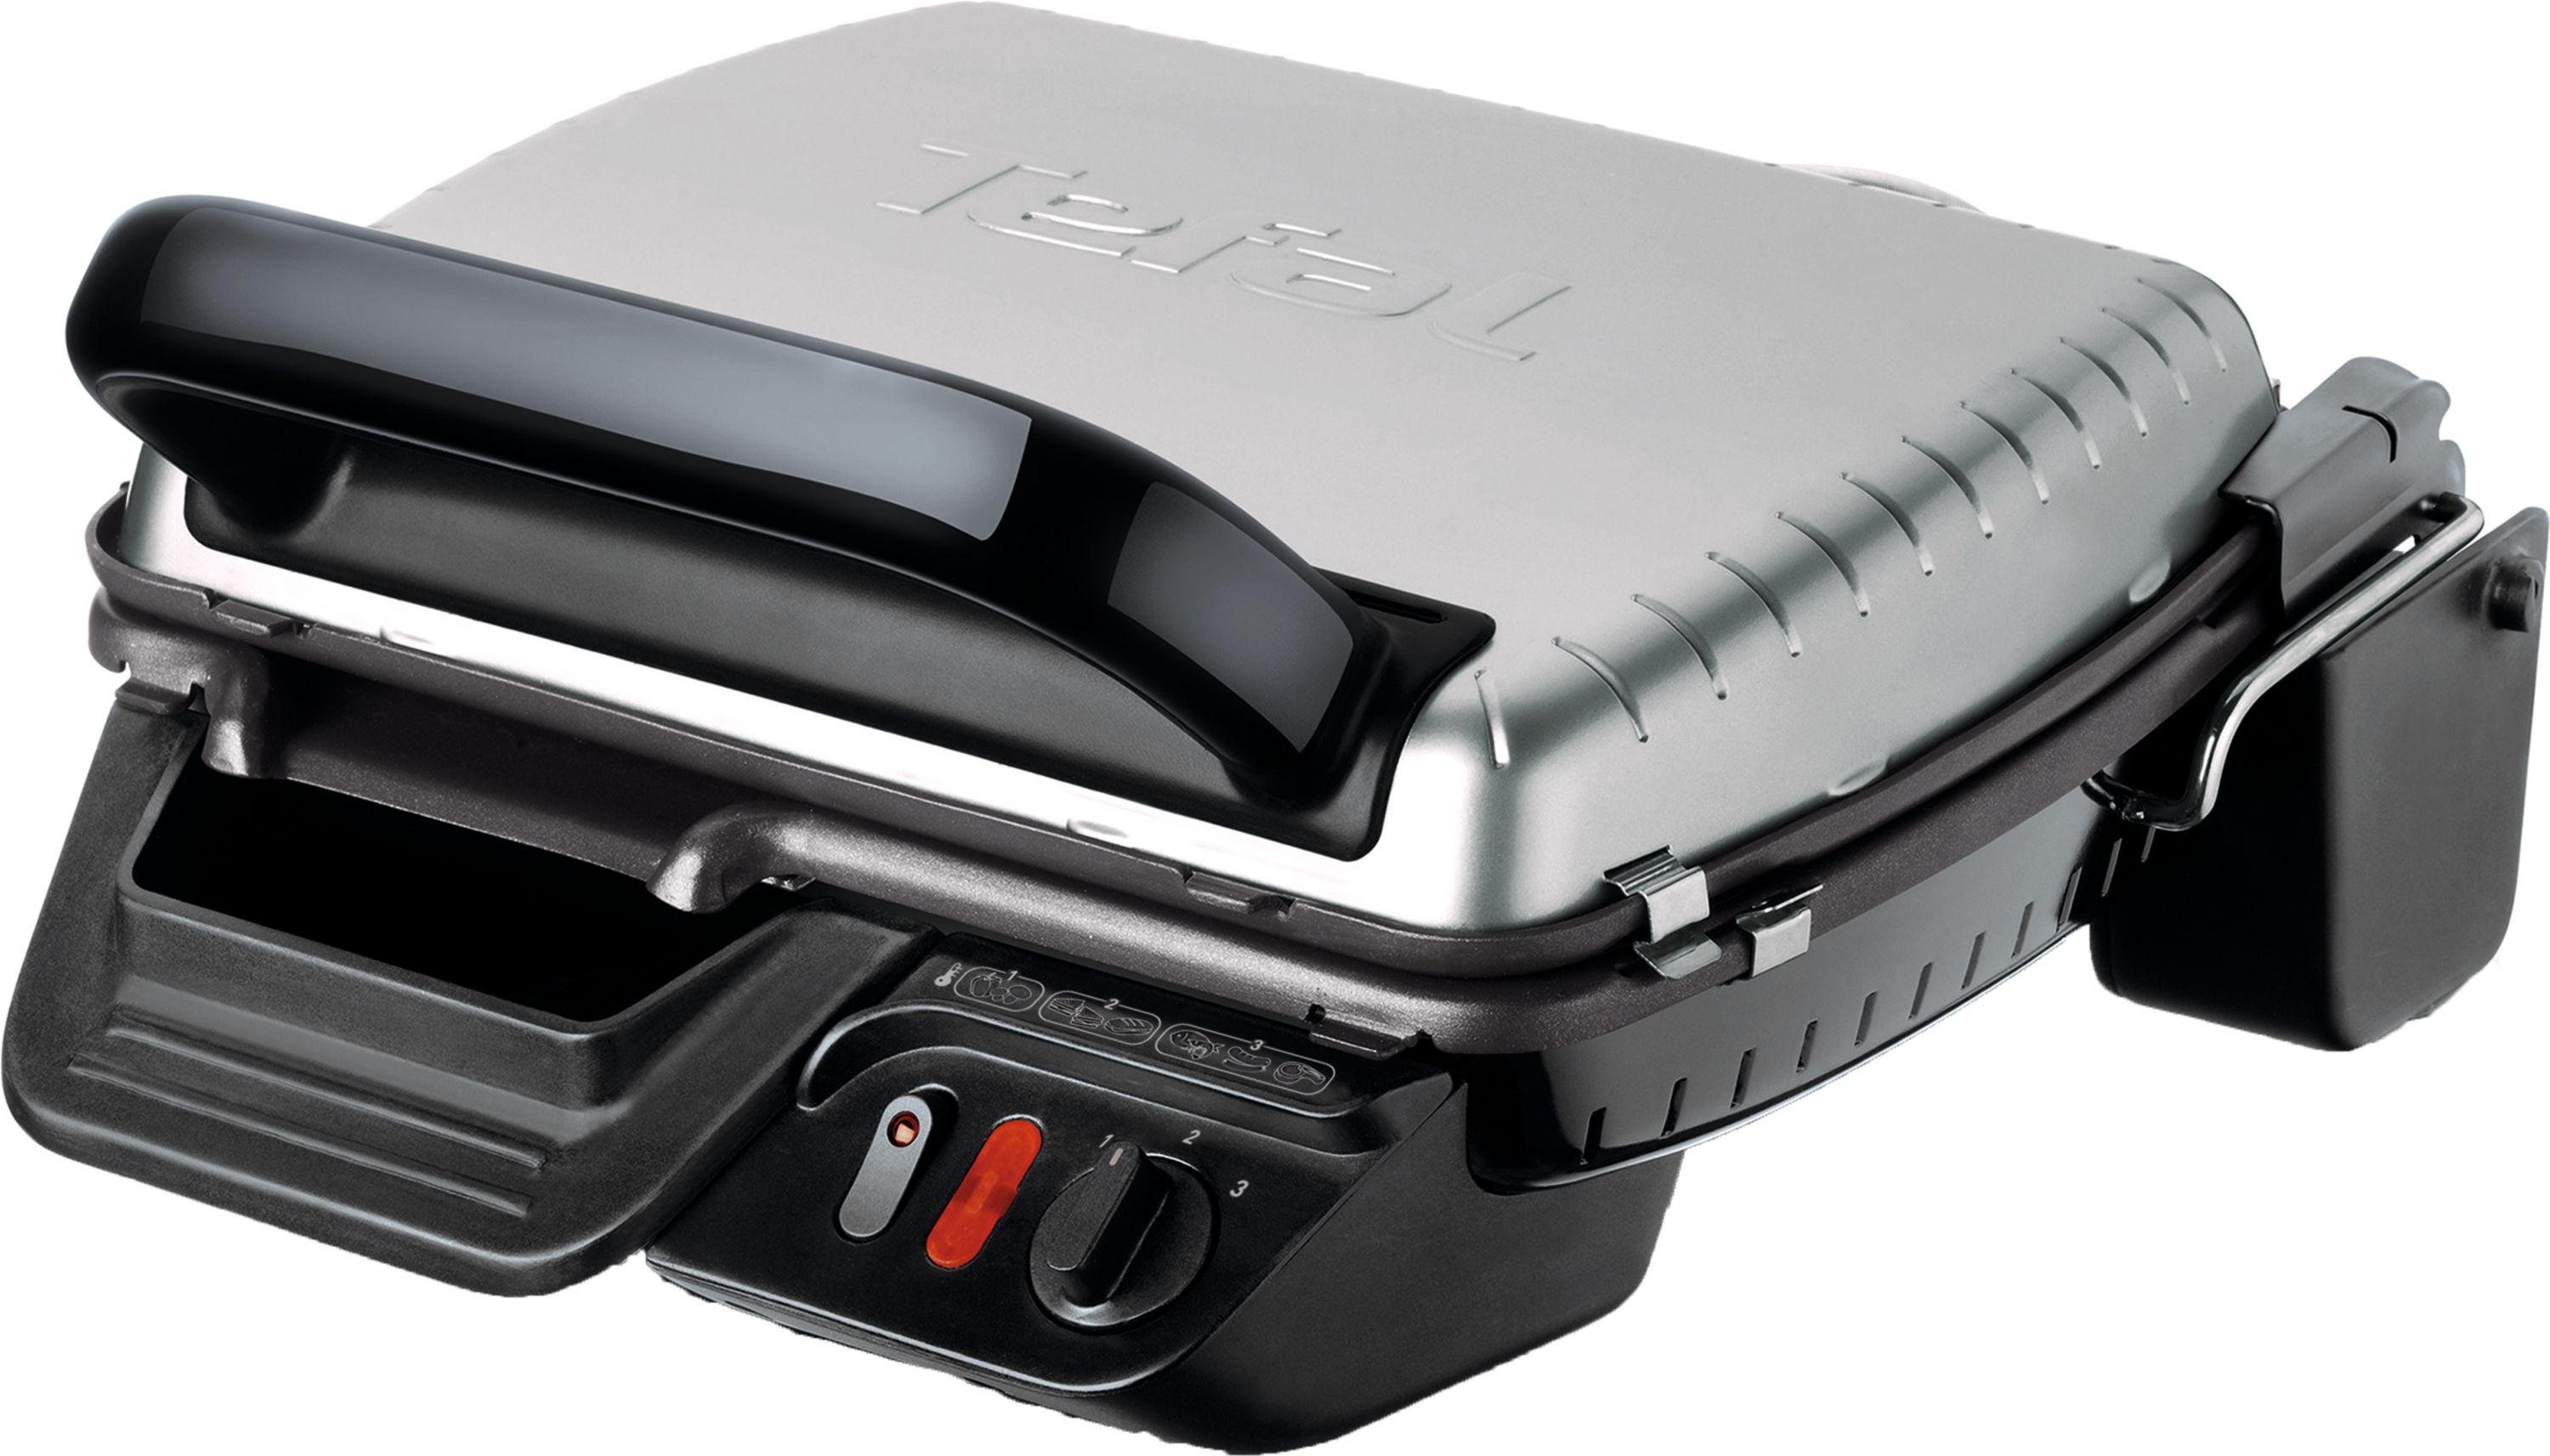 Electric Grill Tefal Ultra Compact 600 Classic GC3050 Unpacked